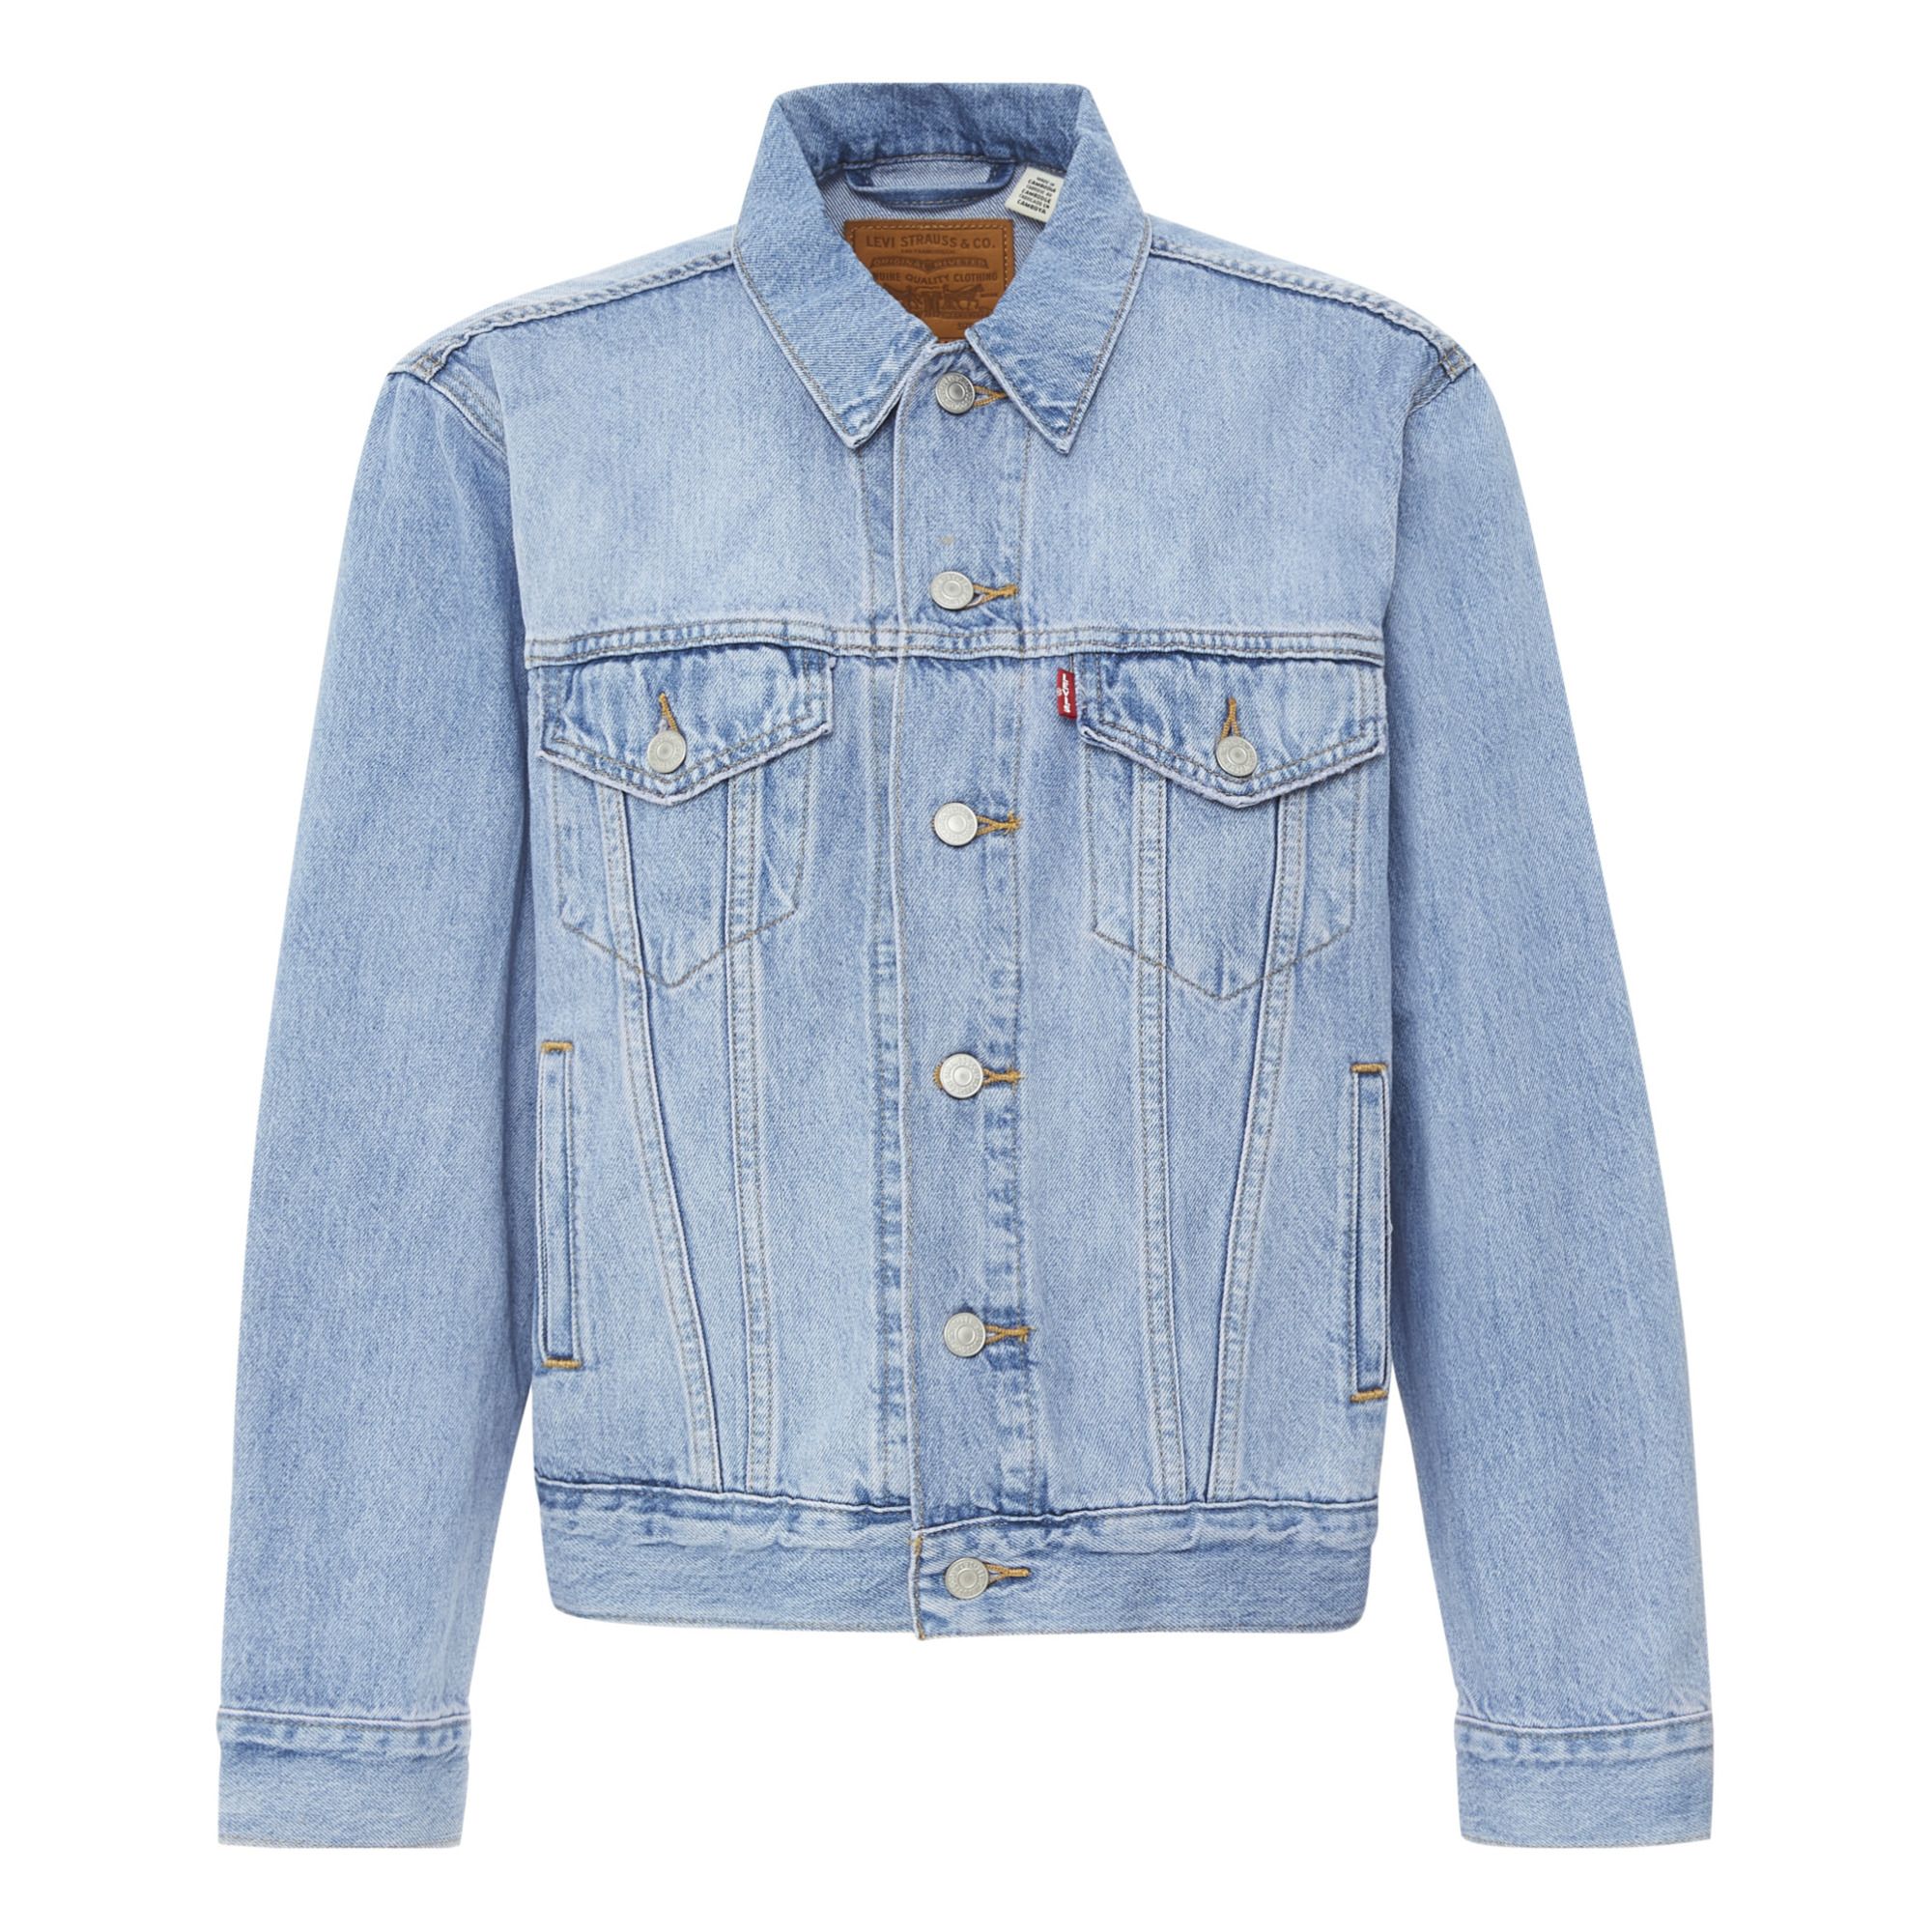 Levi's Made & Crafted - Levi's Ex Boyfriend Trucker Jacket - Light Blue |  Smallable